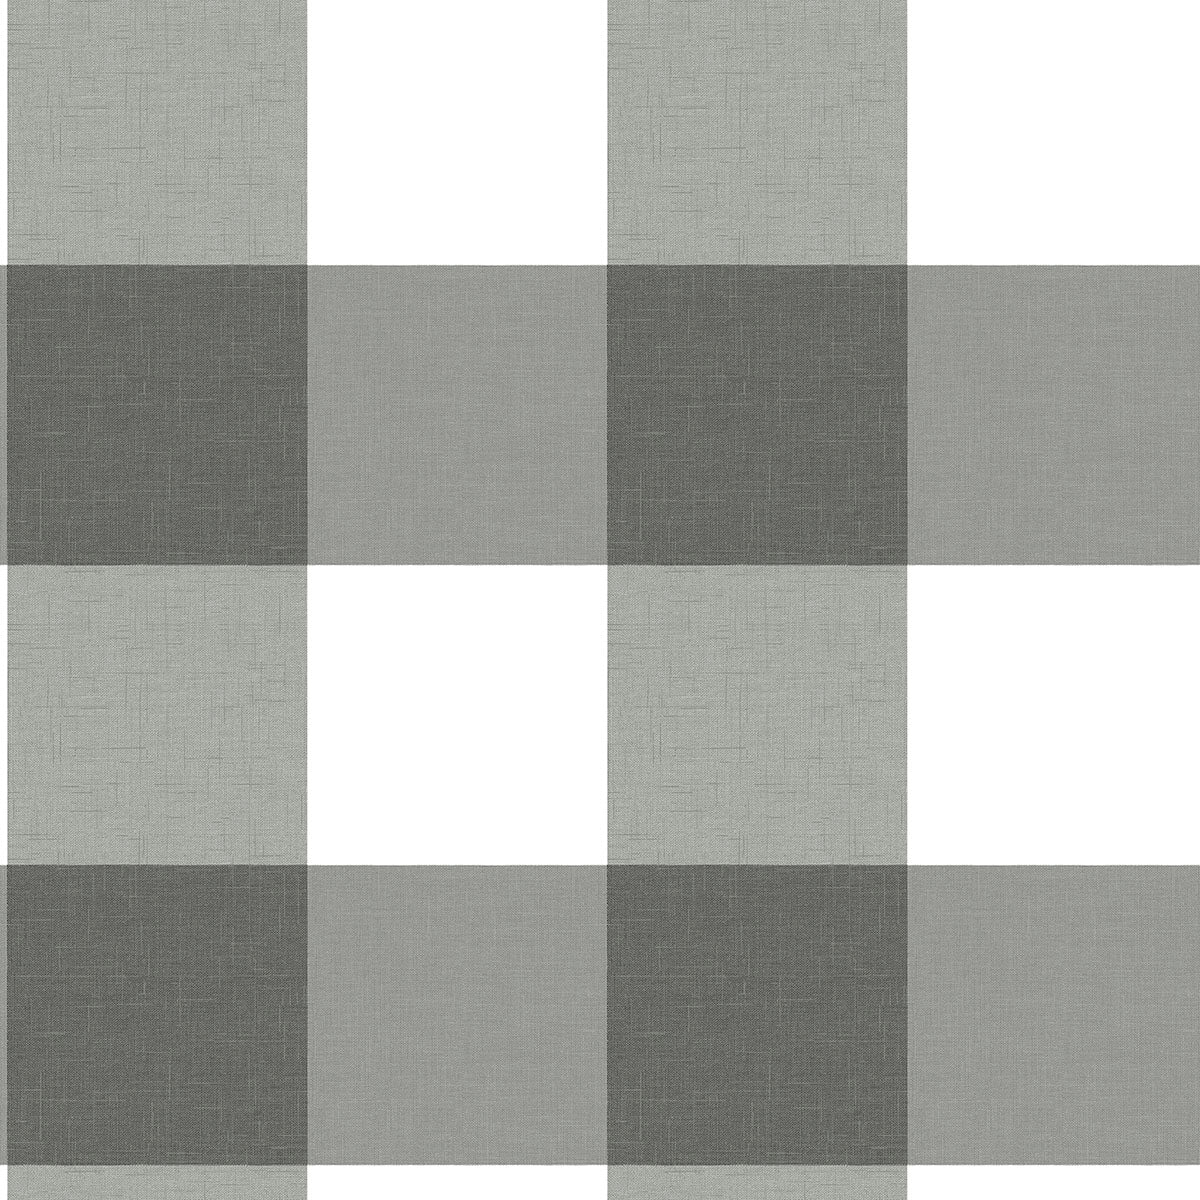 View 3123-12532 Homestead Amos Charcoal Gingham Charcoal by Chesapeake Wallpaper